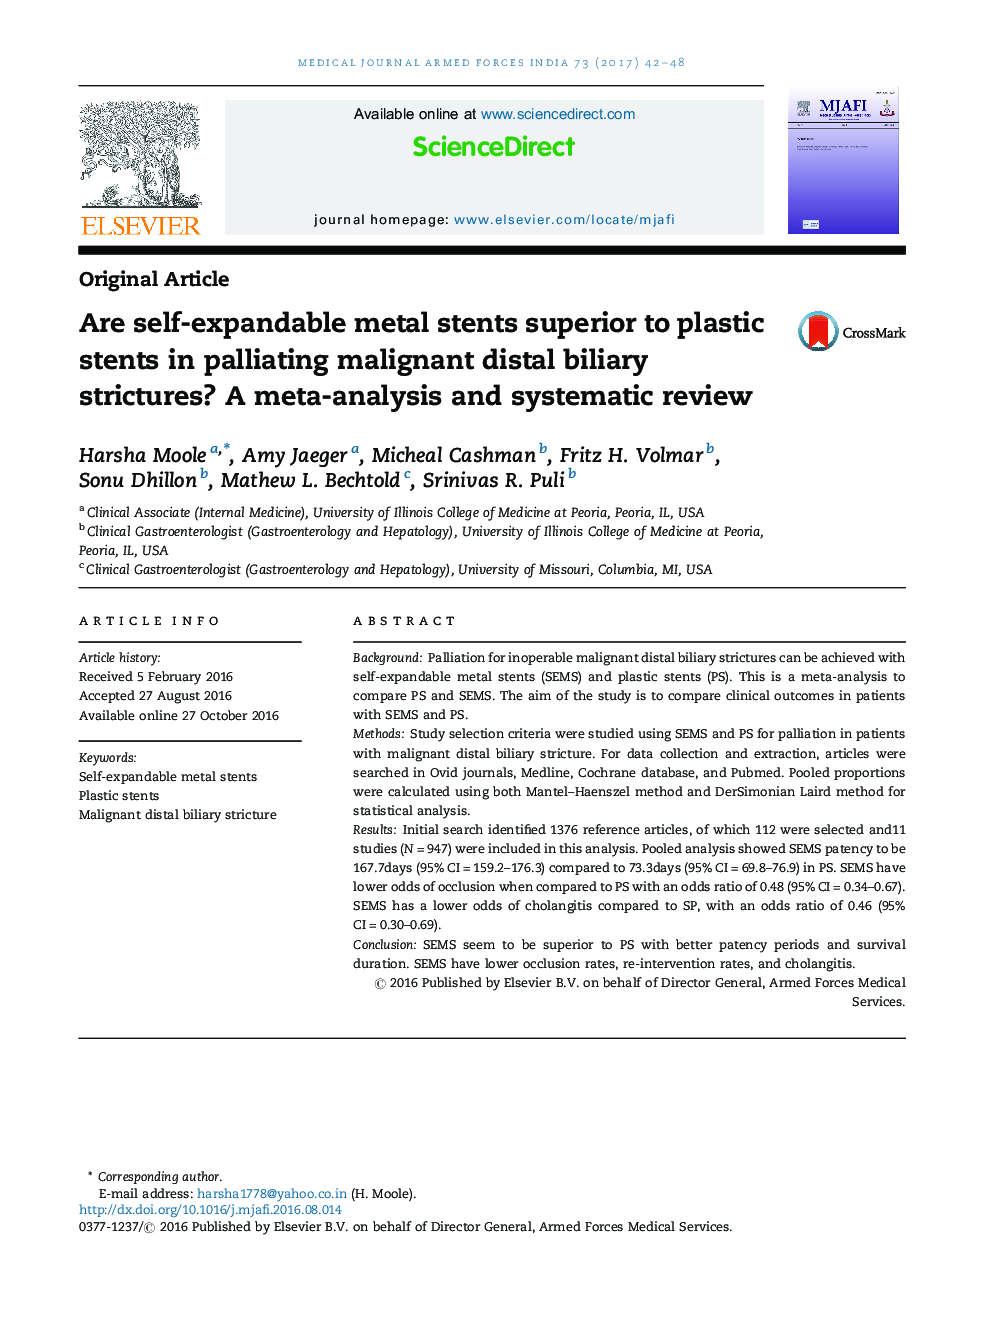 Are self-expandable metal stents superior to plastic stents in palliating malignant distal biliary strictures? A meta-analysis and systematic review